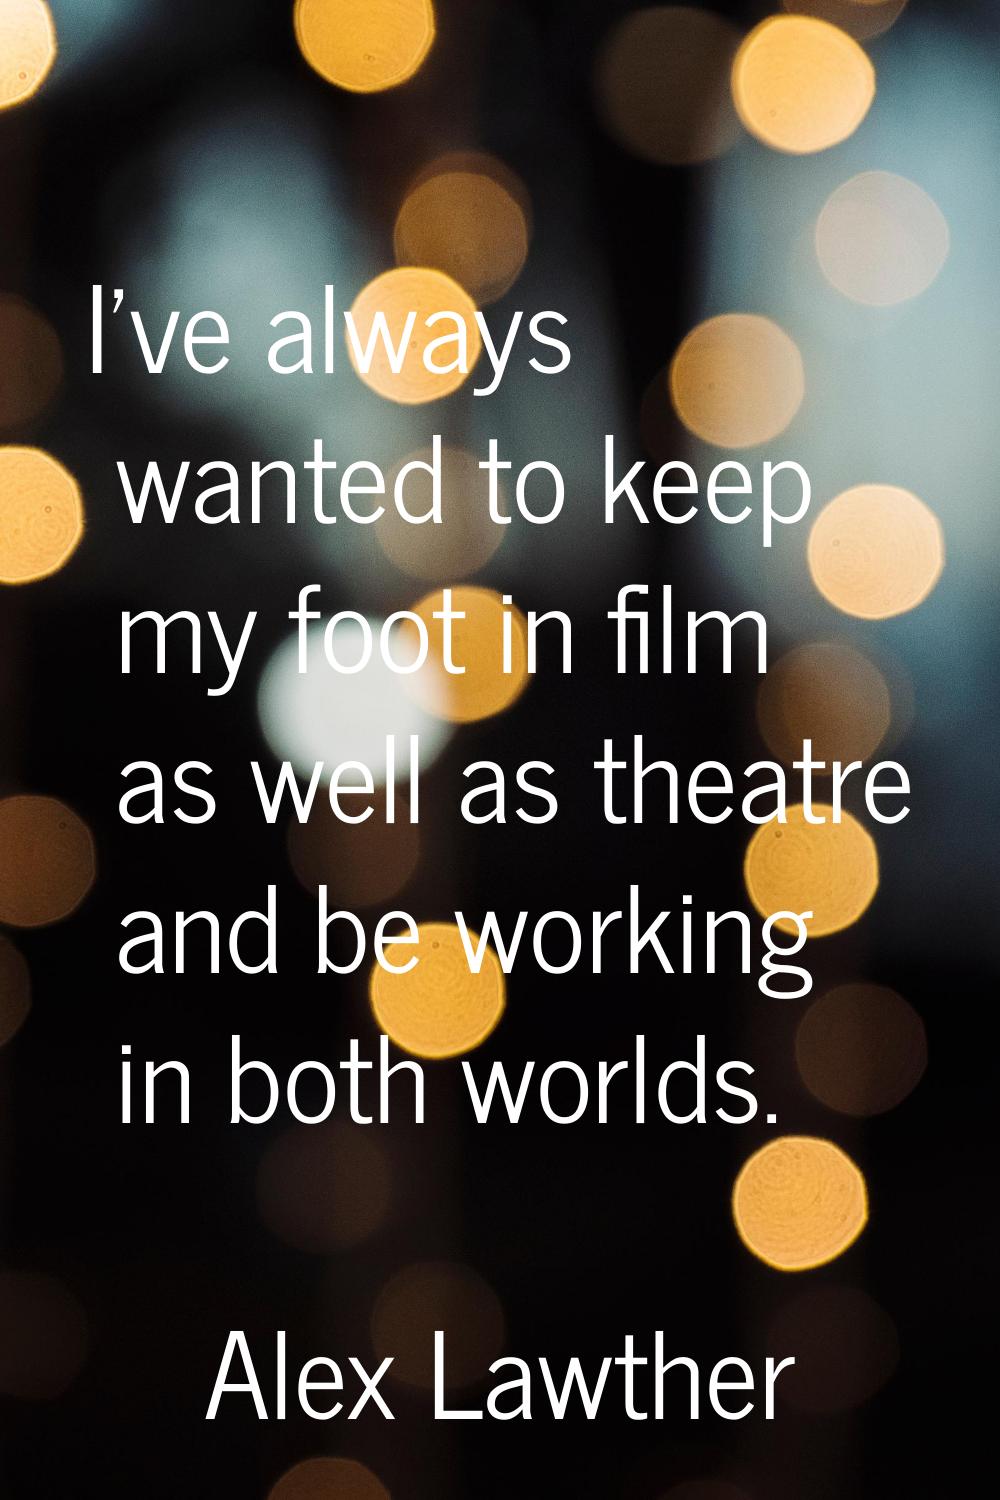 I've always wanted to keep my foot in film as well as theatre and be working in both worlds.